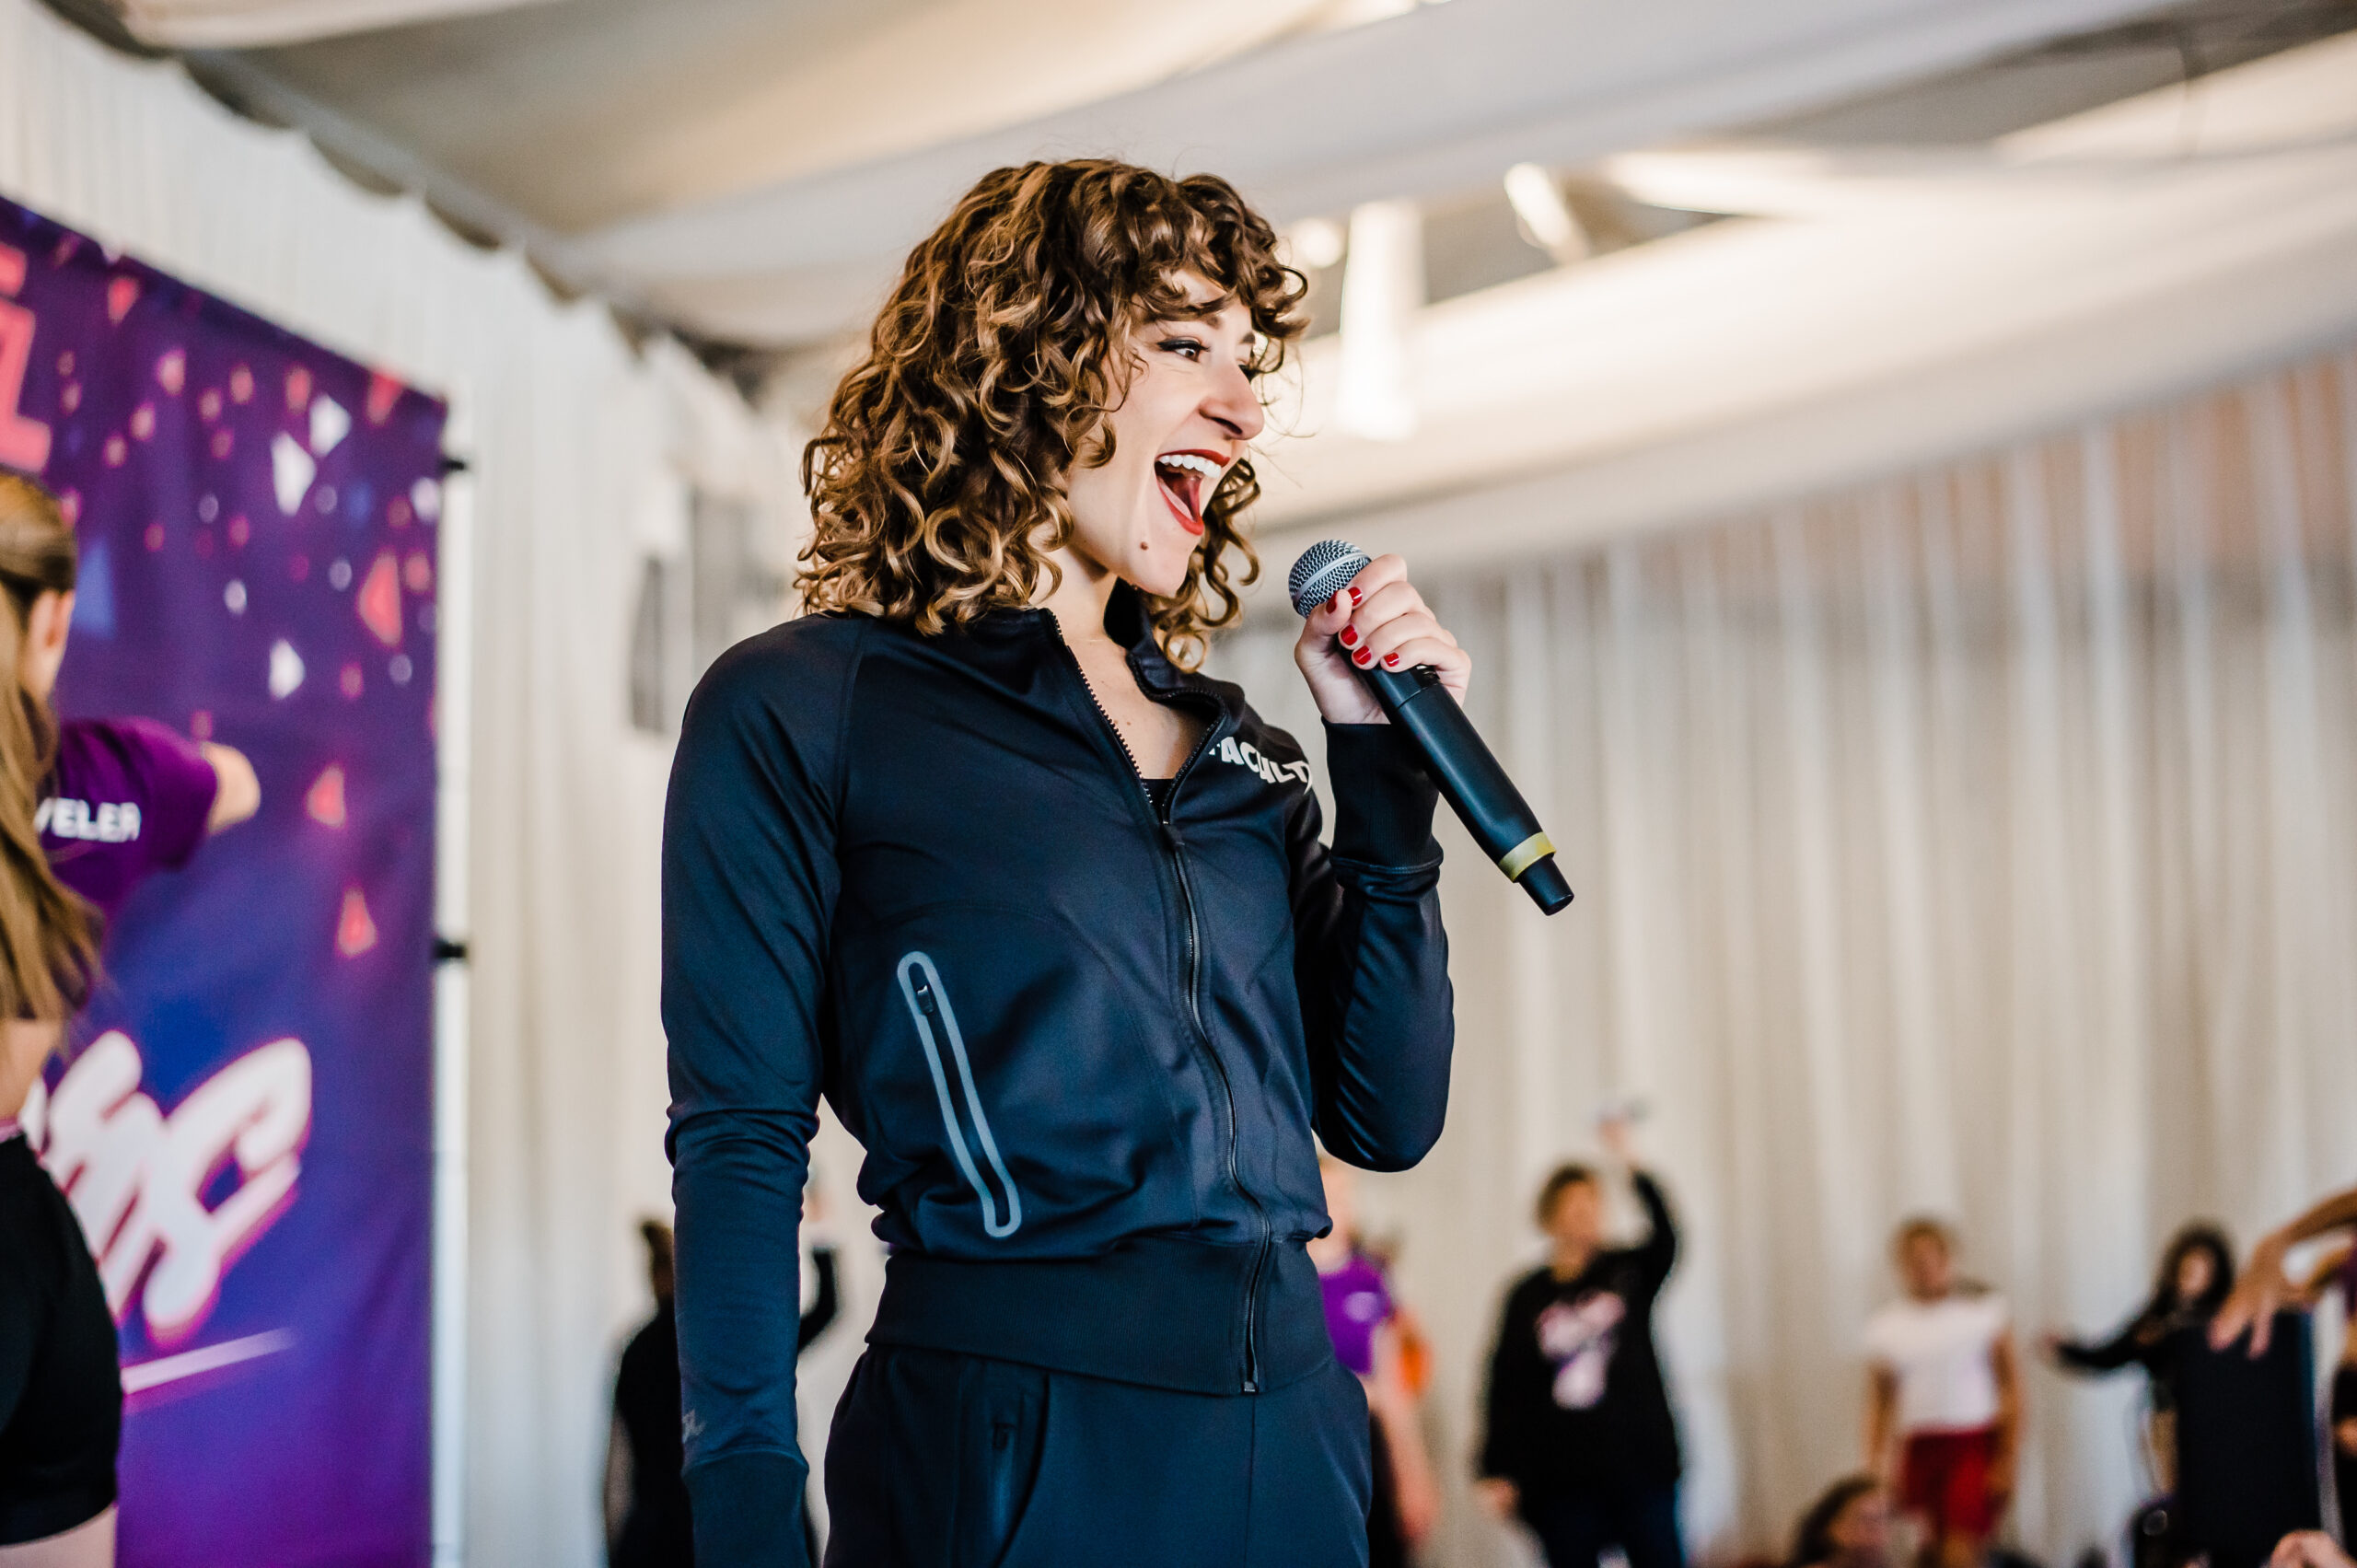 a female wearing black with curly hair speaking into a microphone